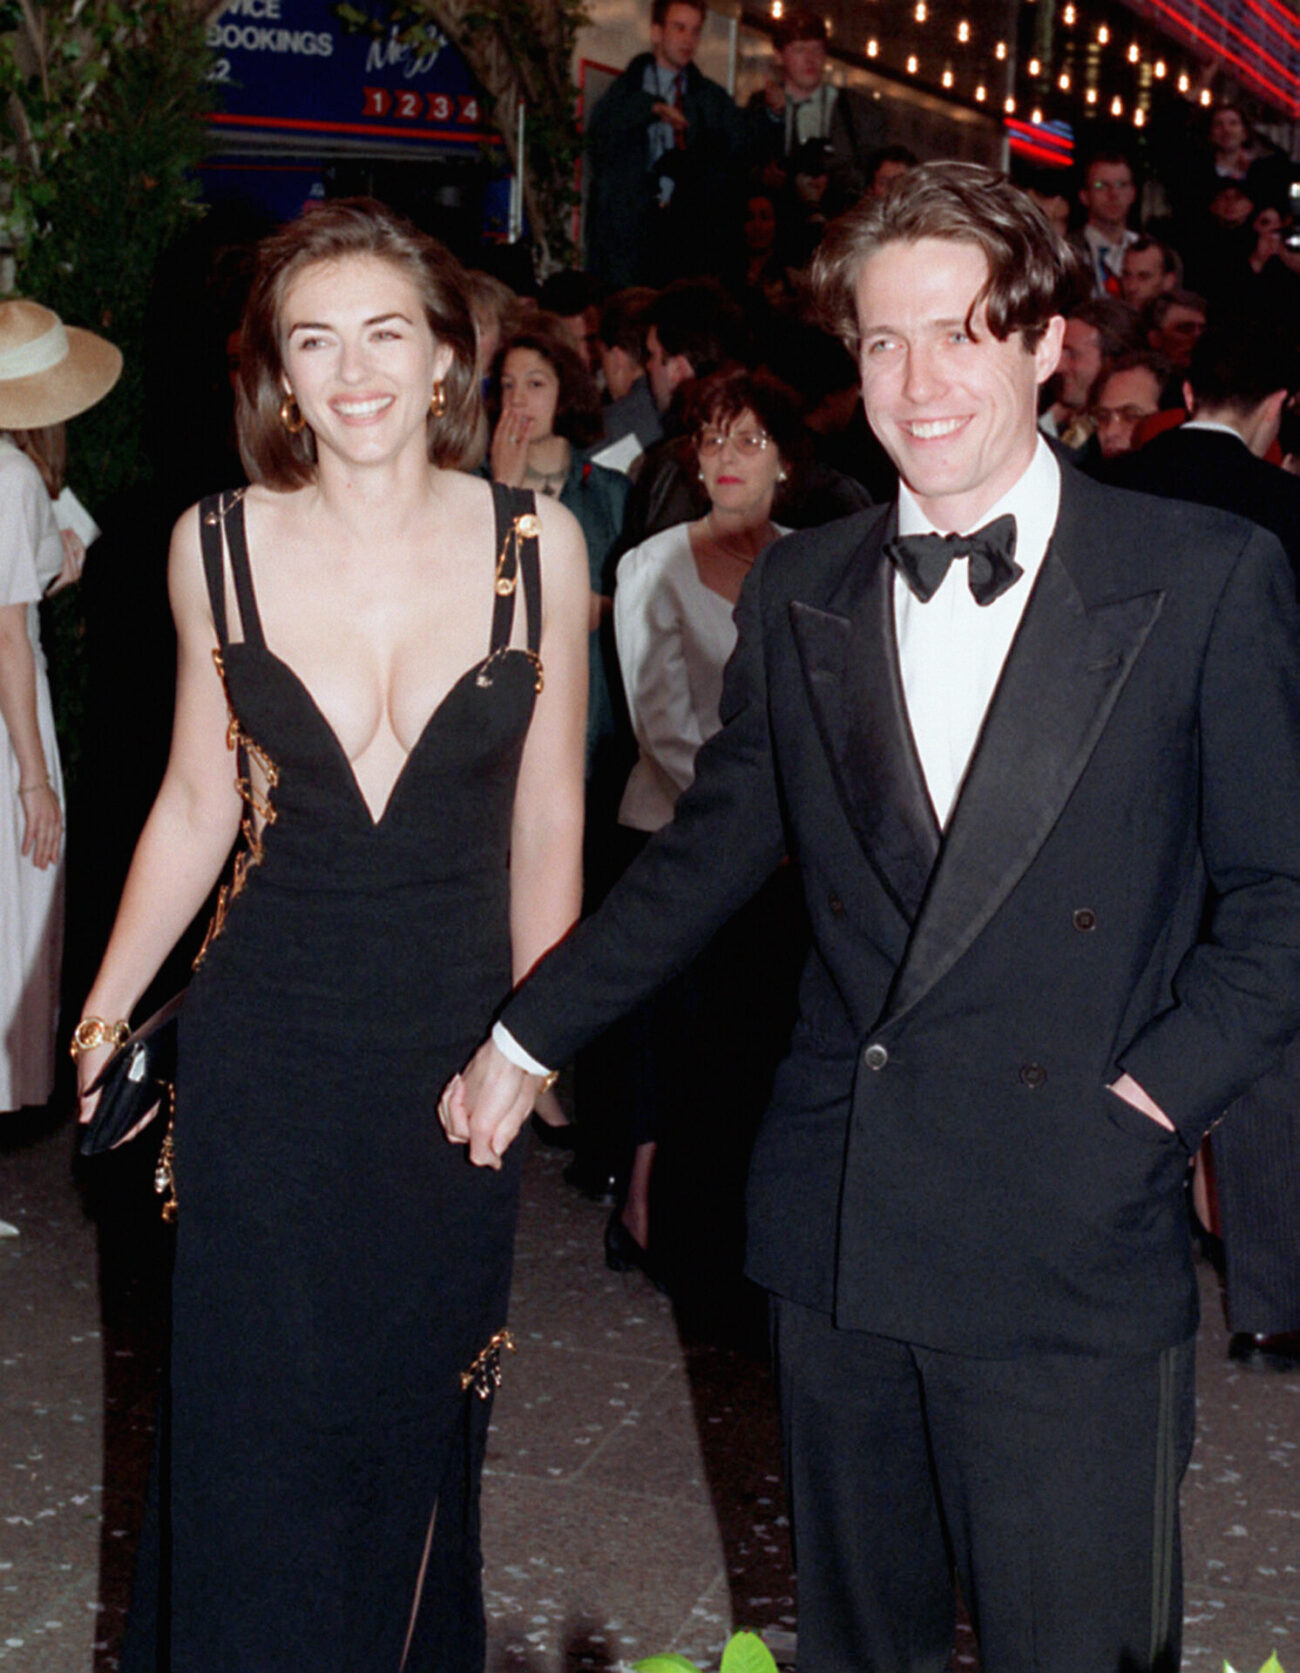 Actor Hugh Grant, star of 'Four Weddings and a Funeral', arrives for the charity premiere of the film with his girlfriend, actress Elizabeth Hurley, at the Odeon Cinema in London's Leicester Square. Miss Hurley wears a revealing Versace evening dress. *27/4/99 Hollywood superstar Julia Roberts jetted into Britain to the premiere of her latest movie, Notting Hill, but was upstaged by co-star Hugh Grant's girlfriend Liz Hurley and her dazzling dress. Model Hurley, the face of Estee Lauder, repeated the same trick she pulled off five years ago for the launch of Four Weddings And A Funeral when she wore a stunning Versace frock. For Notting Hill, the follow up to Four Weddings, she turned heads in a sheer and shimmering backless outfit, which was split from ankle to thigh and was again Versace. (Photo by Michael Stephens - PA Images/PA Images via Getty Images)